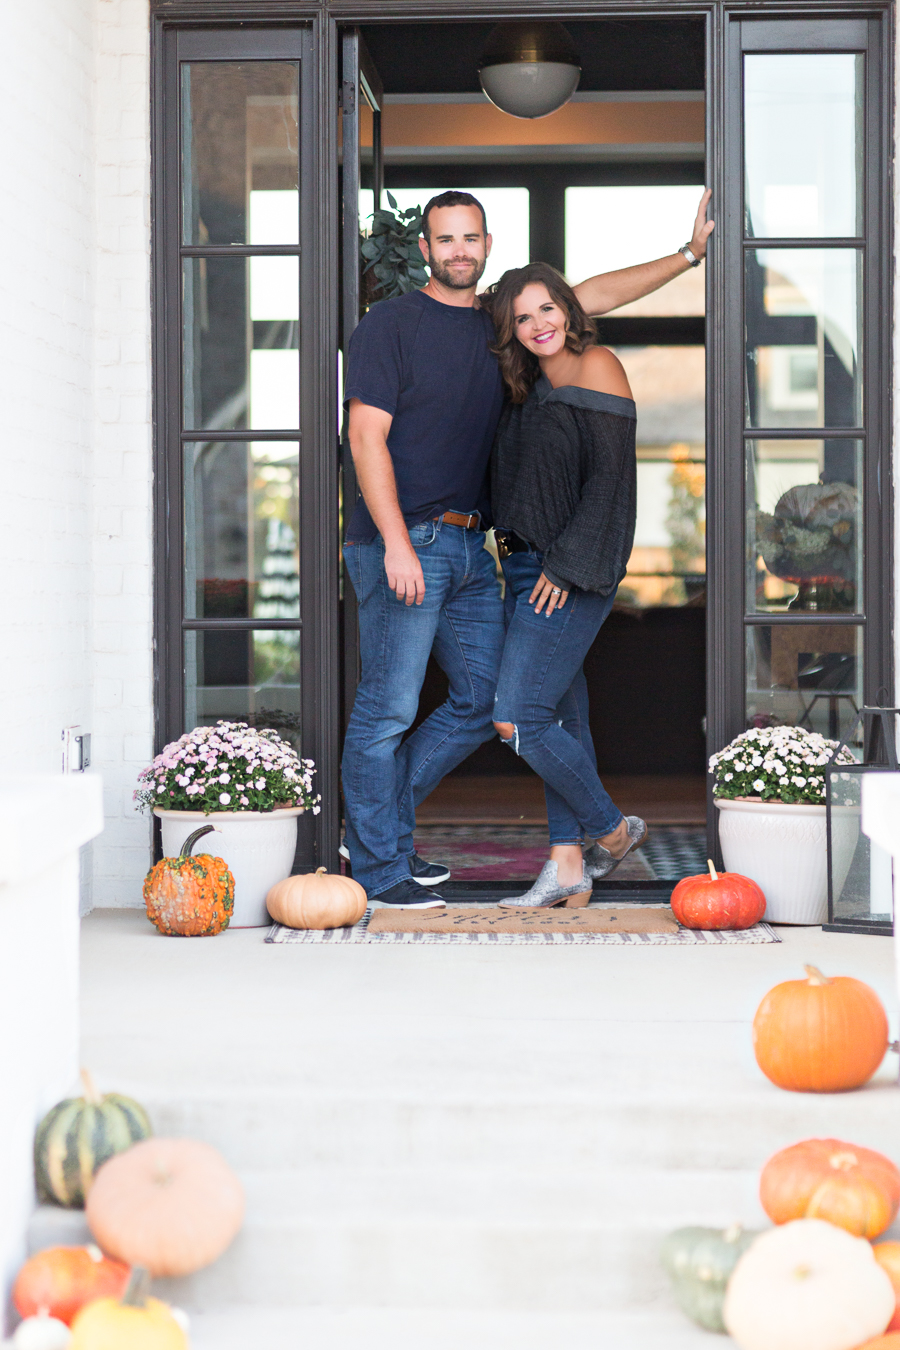 Loveliest Looks of Fall Home Tour Beautiful Fall Home Decor and Fall Fashion Ideas couple who does renovations and design sitting on the front steps of their fall front porch surrounded by pumpkins with the wife wearing old navy rockstar jeans and and off the shoulder gray top and snake skin boots and the husband wearing jeans and a navy shirt and navy cole hahn shoes